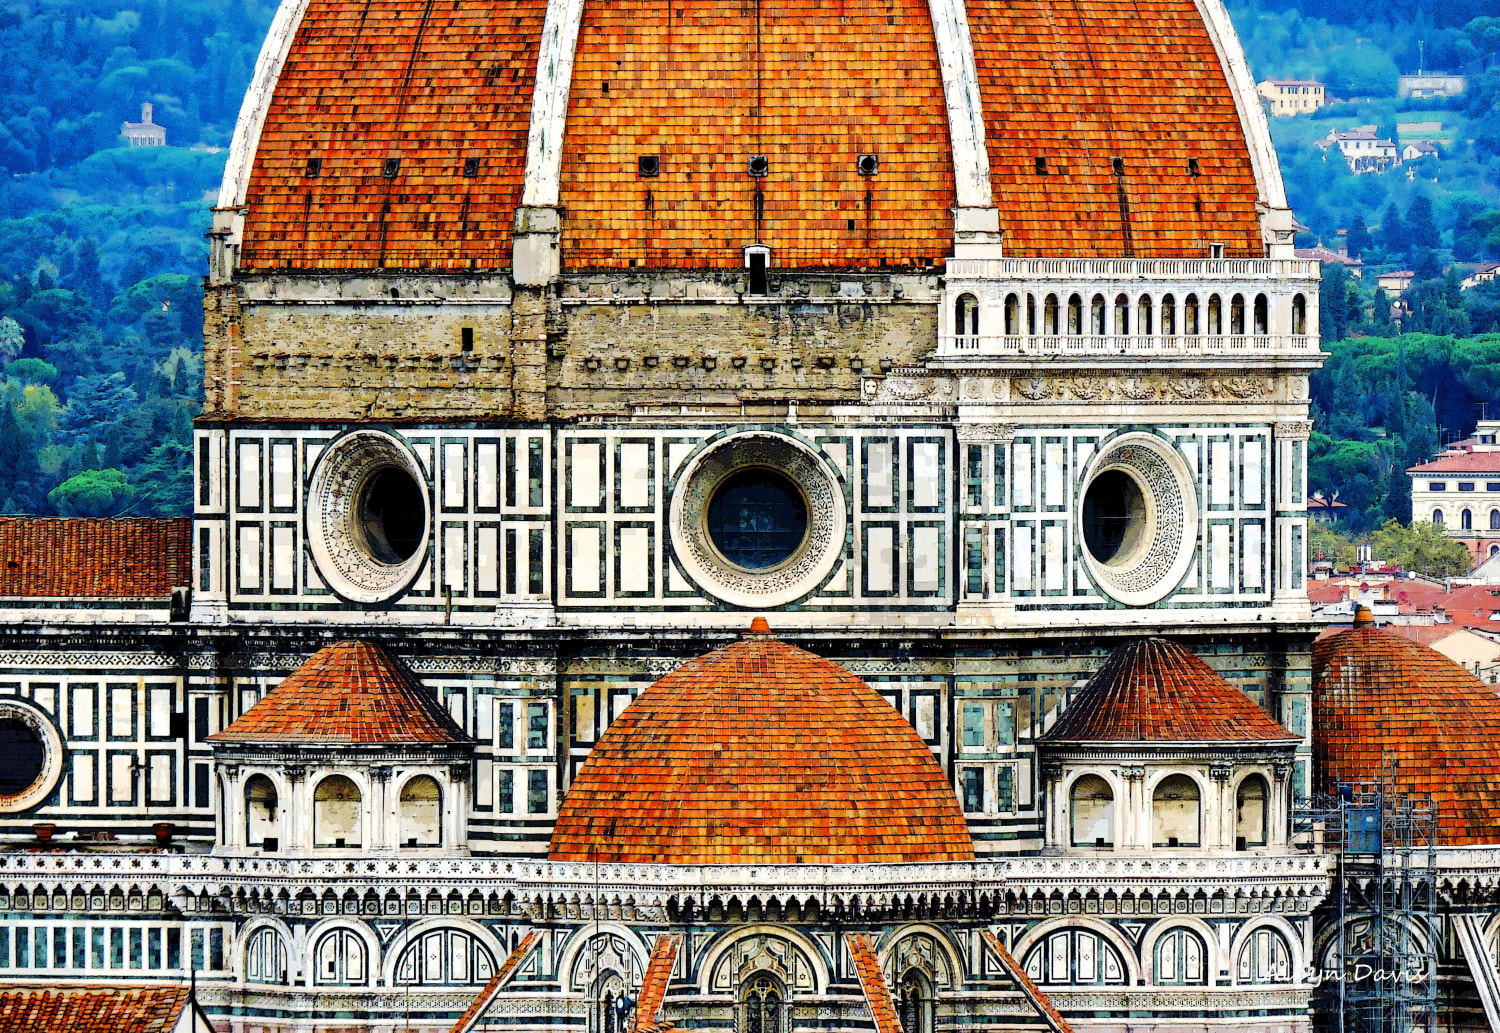 The Gothic style Florence Cathedral is attributed to Arnolfo di Cambio with the dome engineered by Filippo Brunelleschi. It remains the largest brick dome ever constructed.It was completed by 1436.